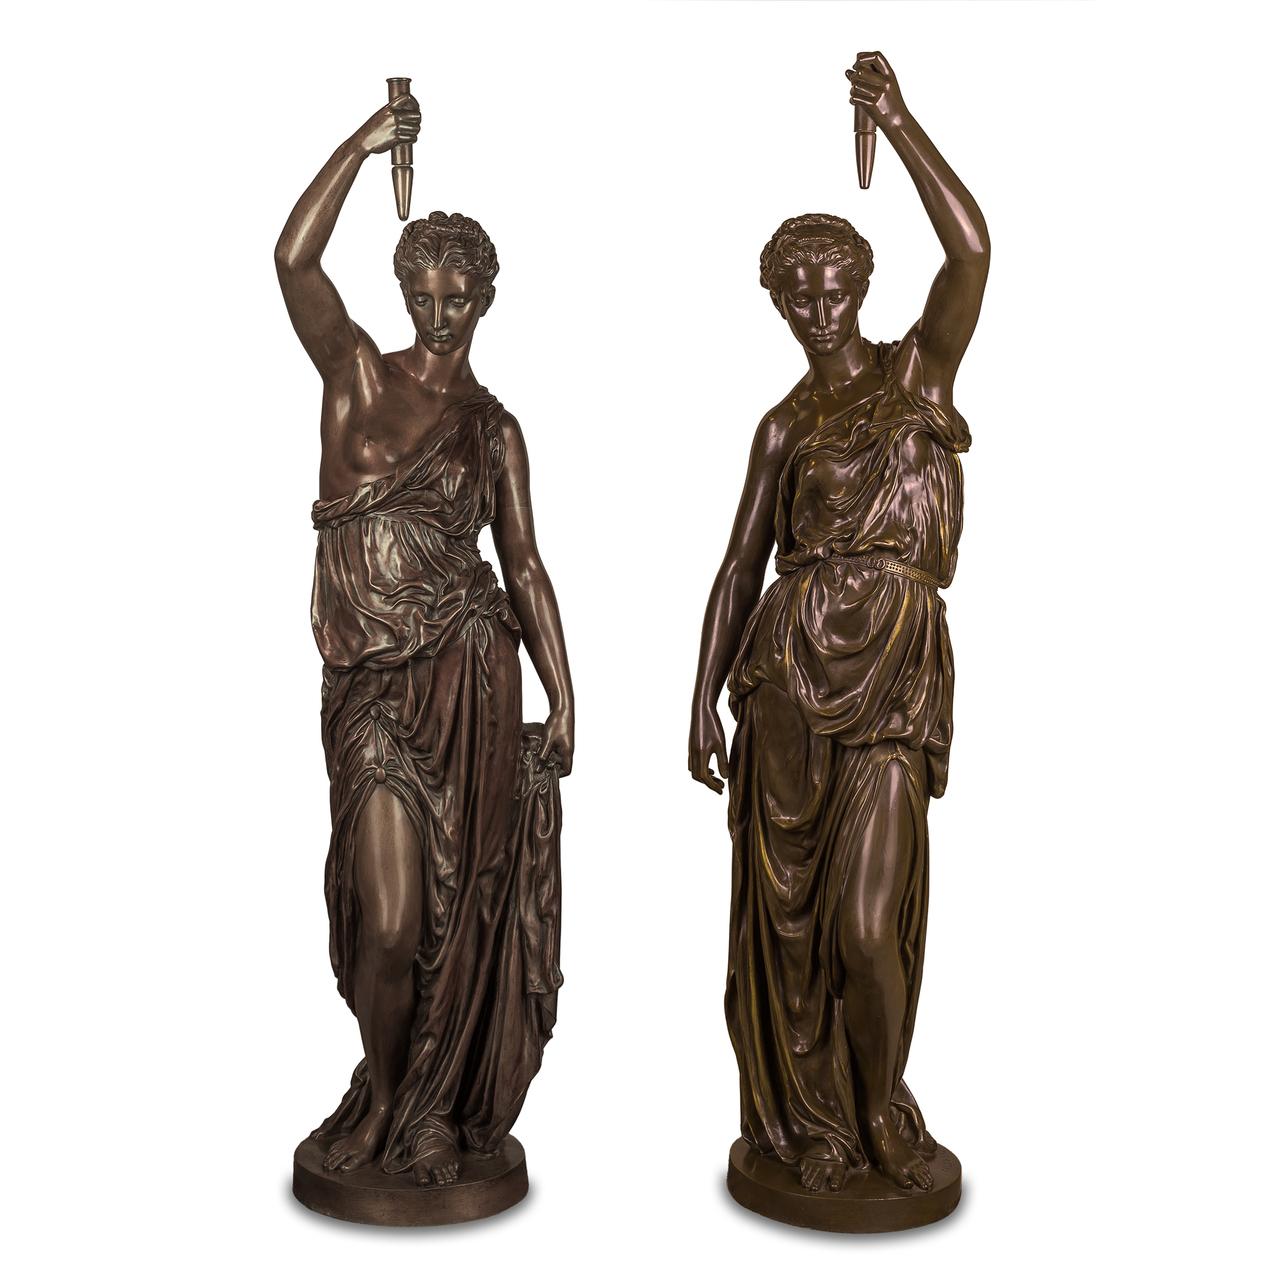 Ferdinand Barbedienne Figurative Sculpture - An Important Pair of Monumental Parcel-Gilt and Patinated Bronze Figural Torchèr